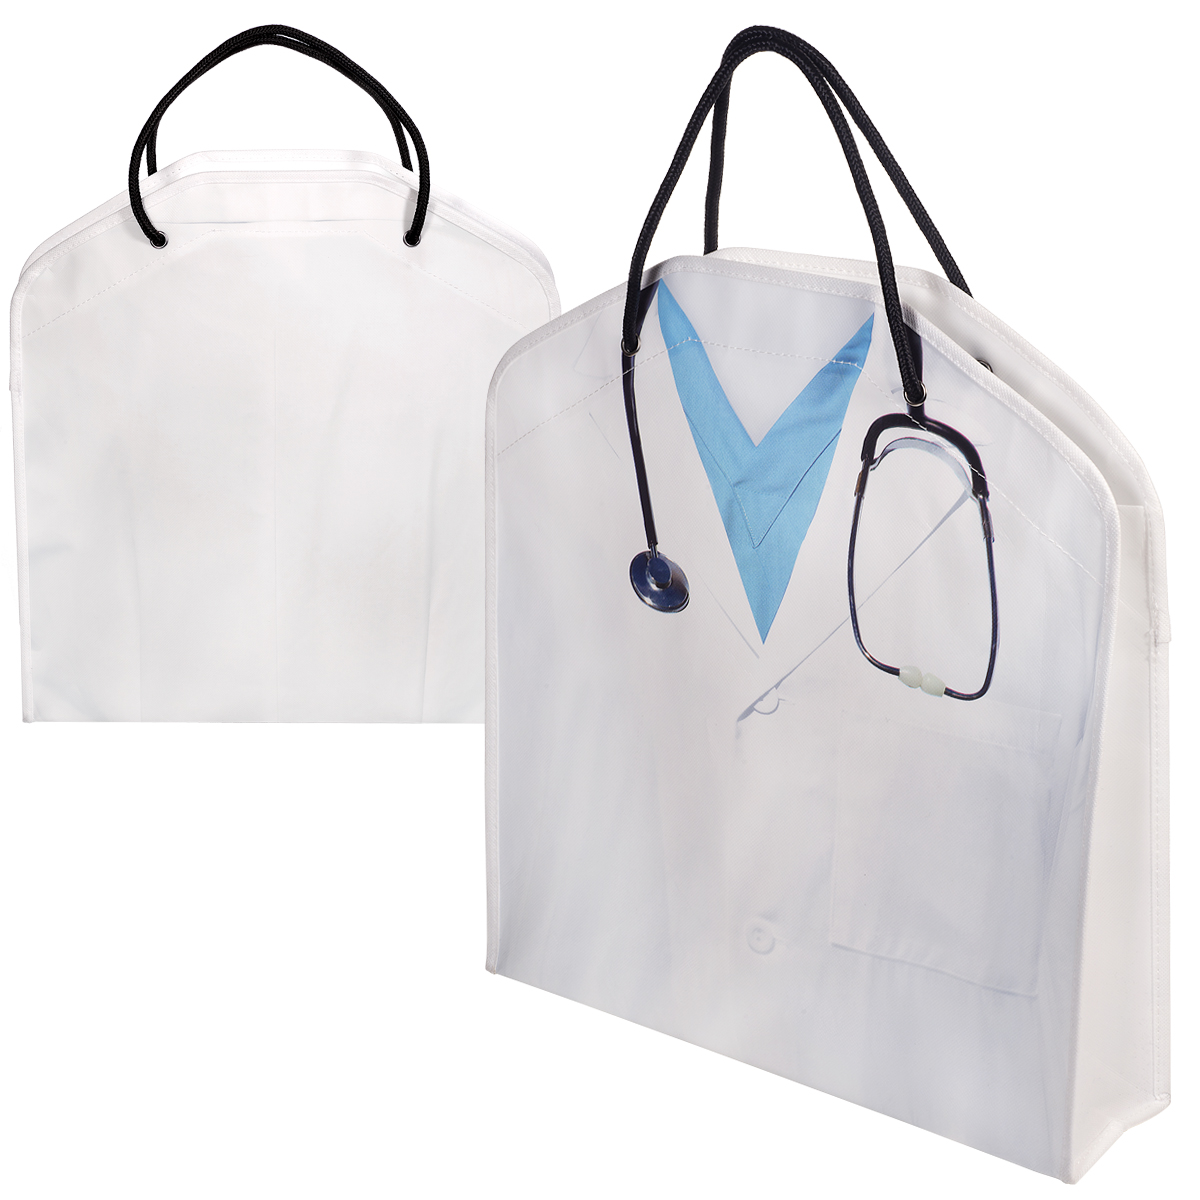 Doctor Tote